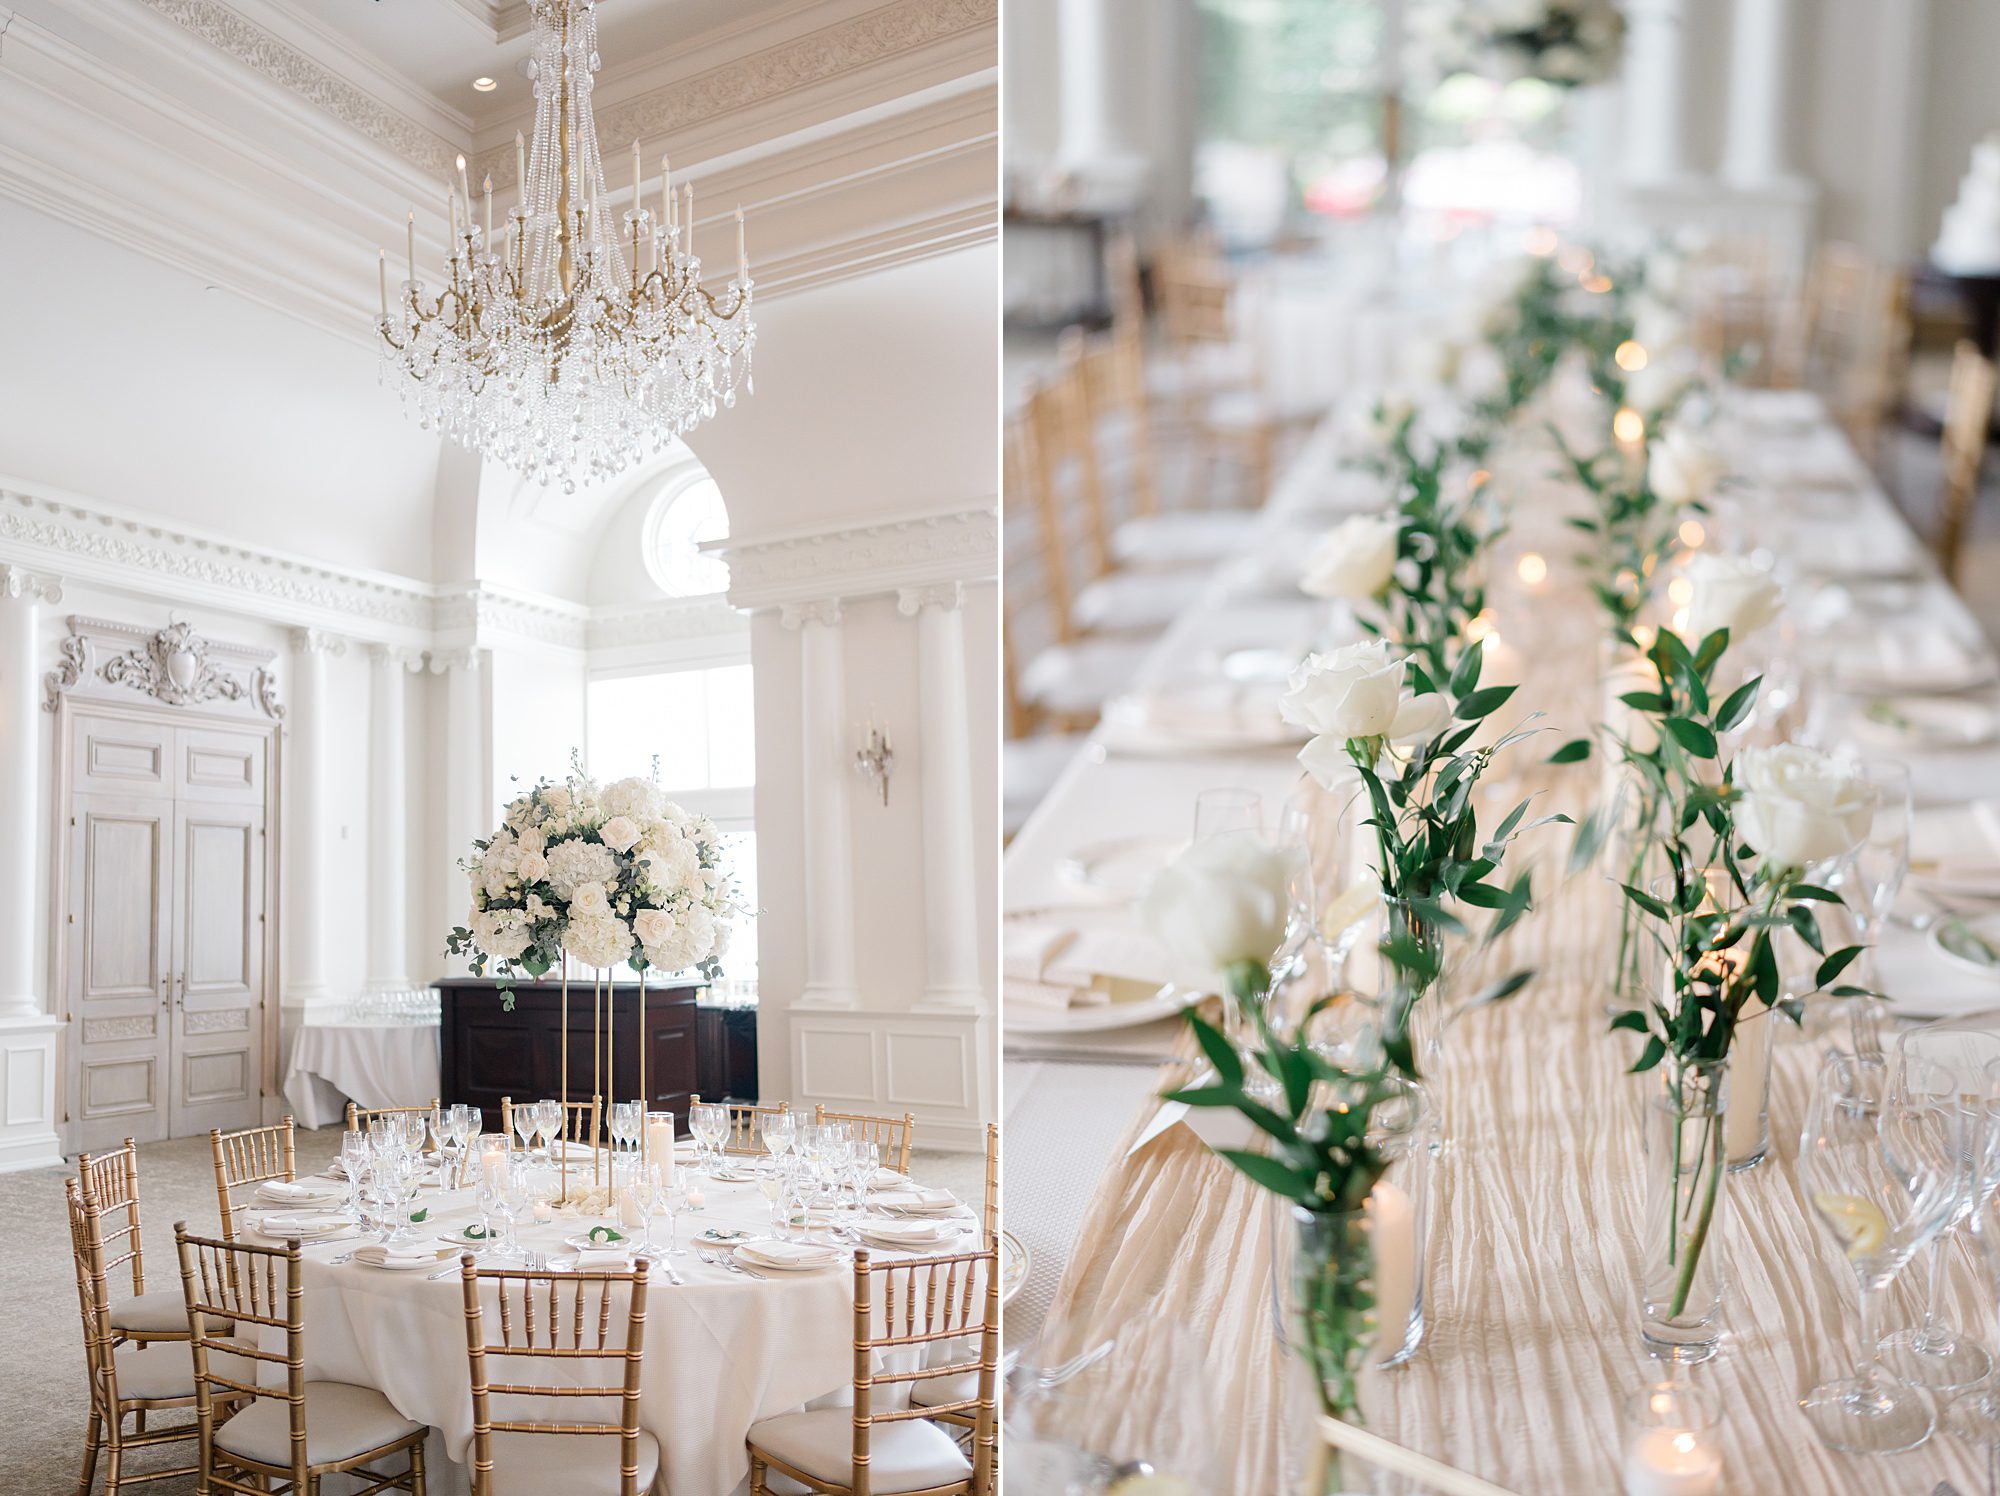 classic white florals and centerpieces